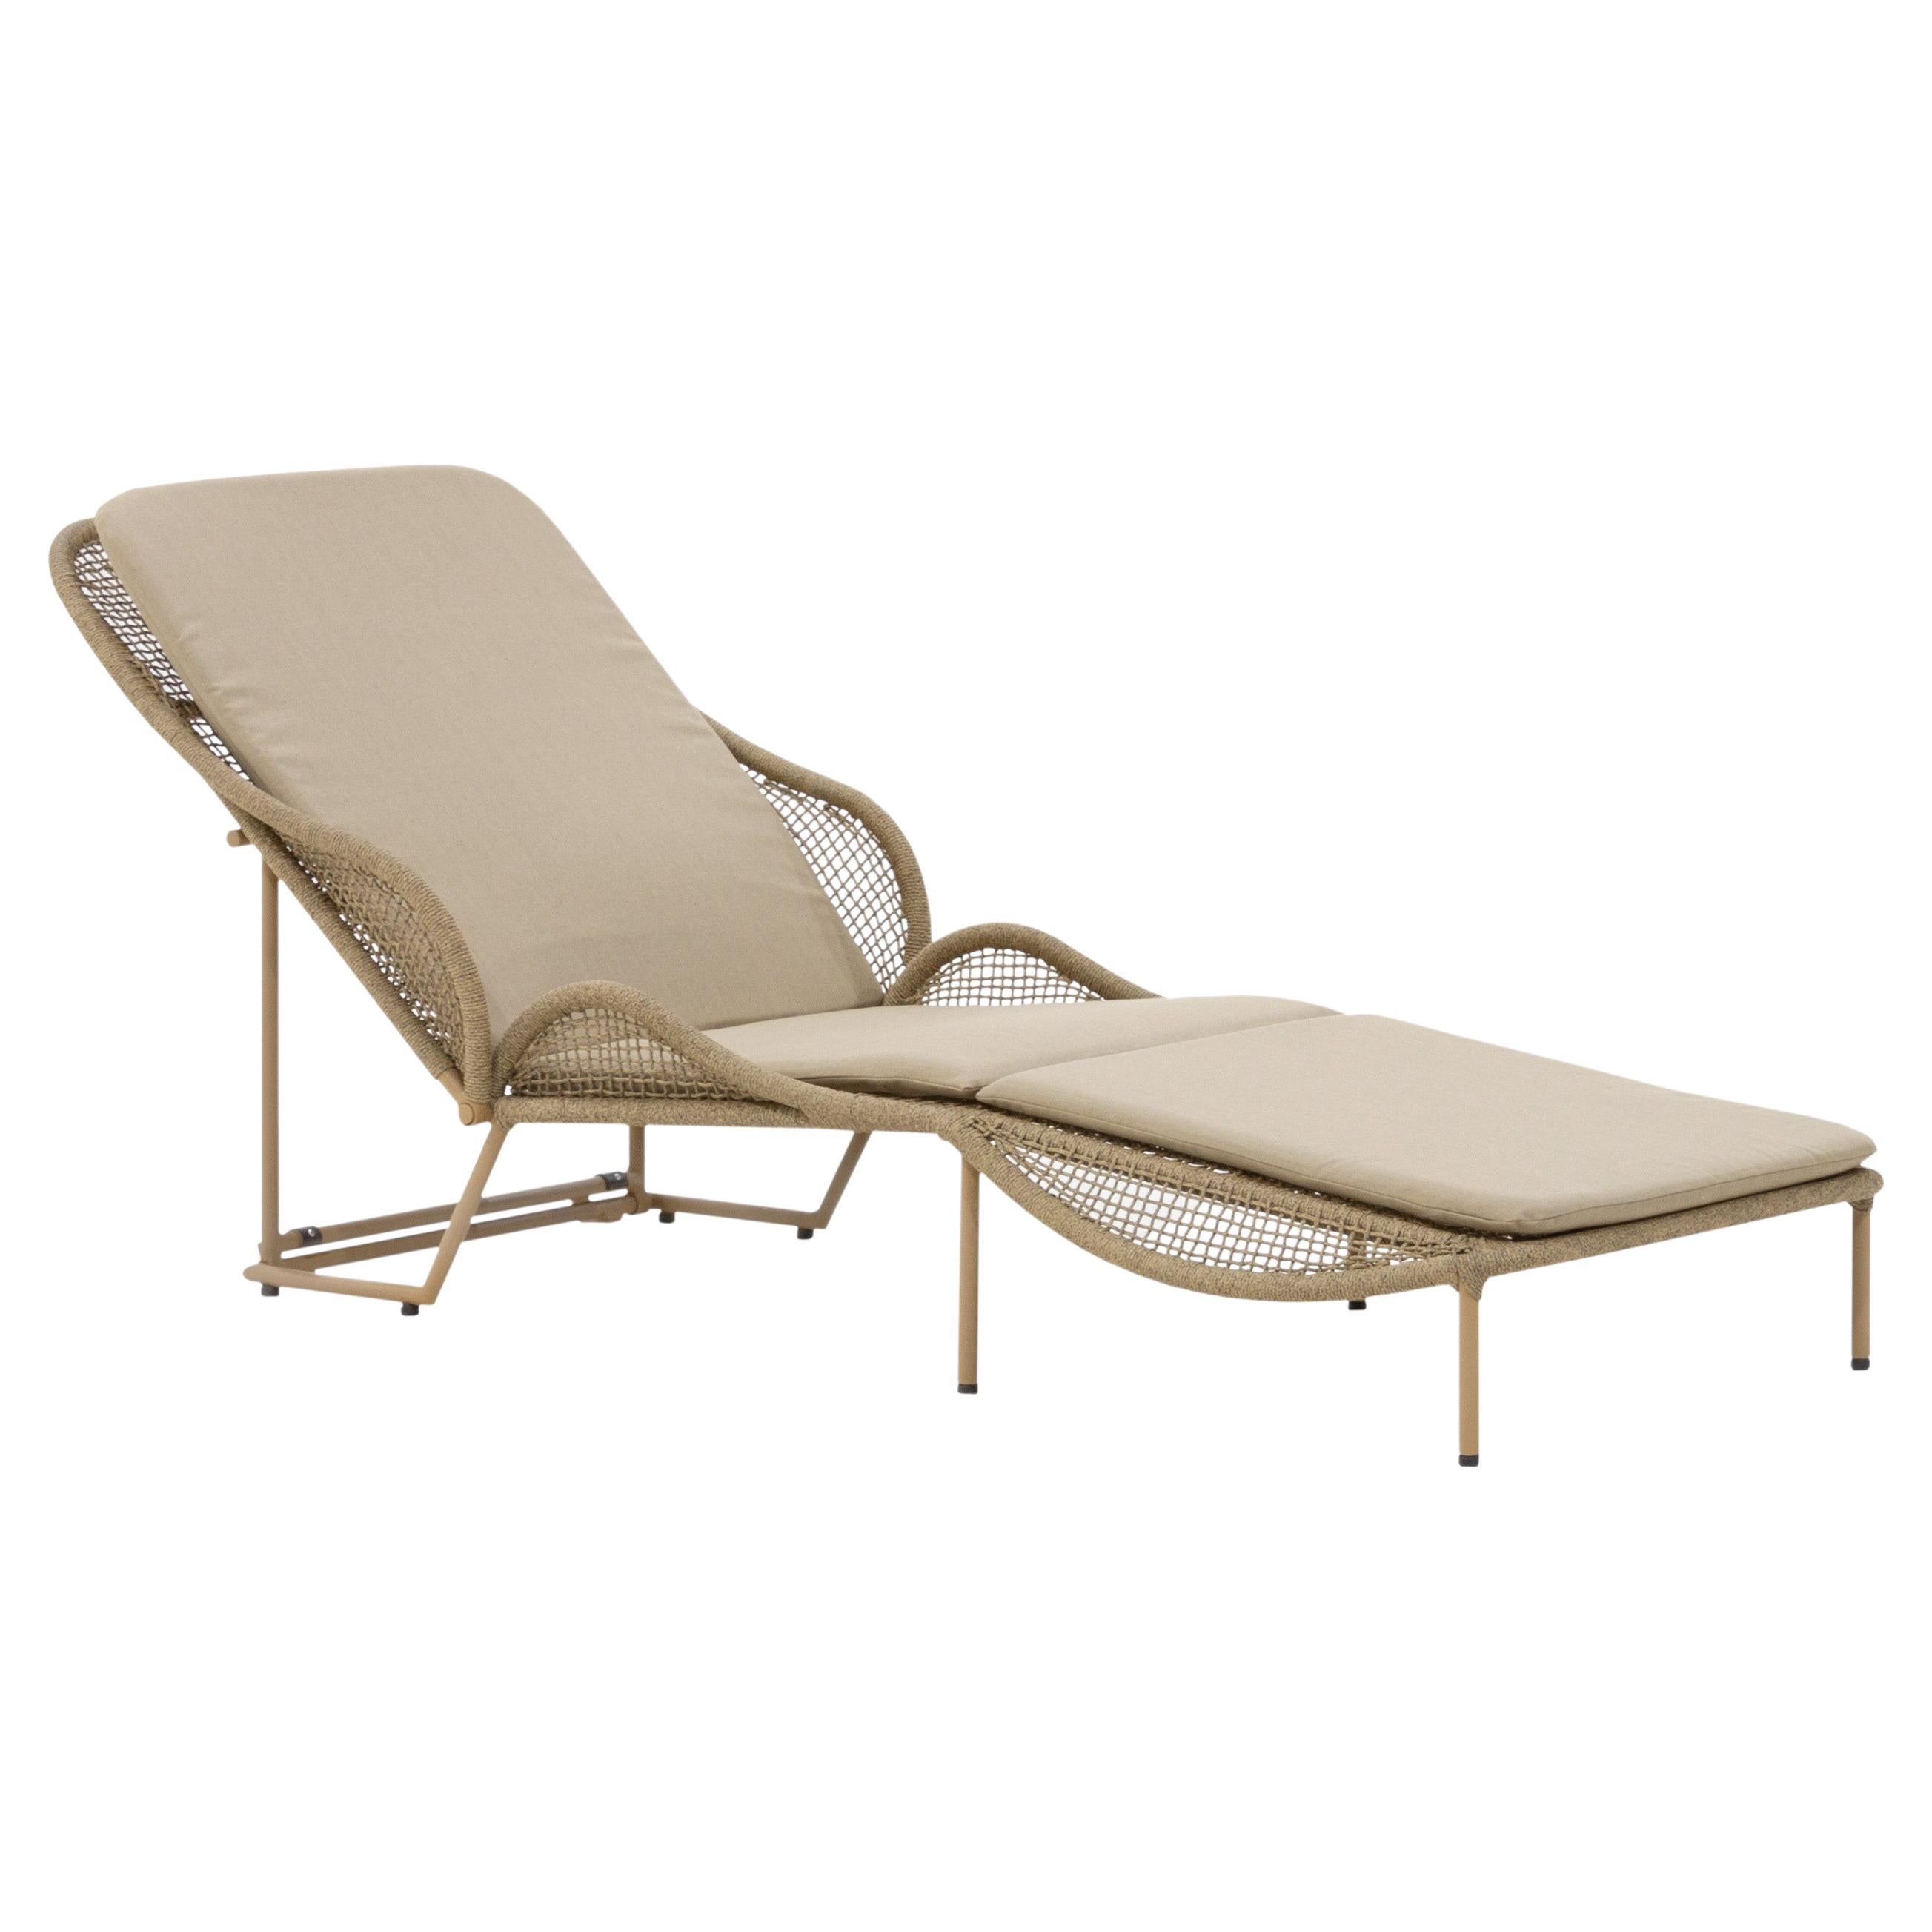 Butterfly Sun Lounger For Sale